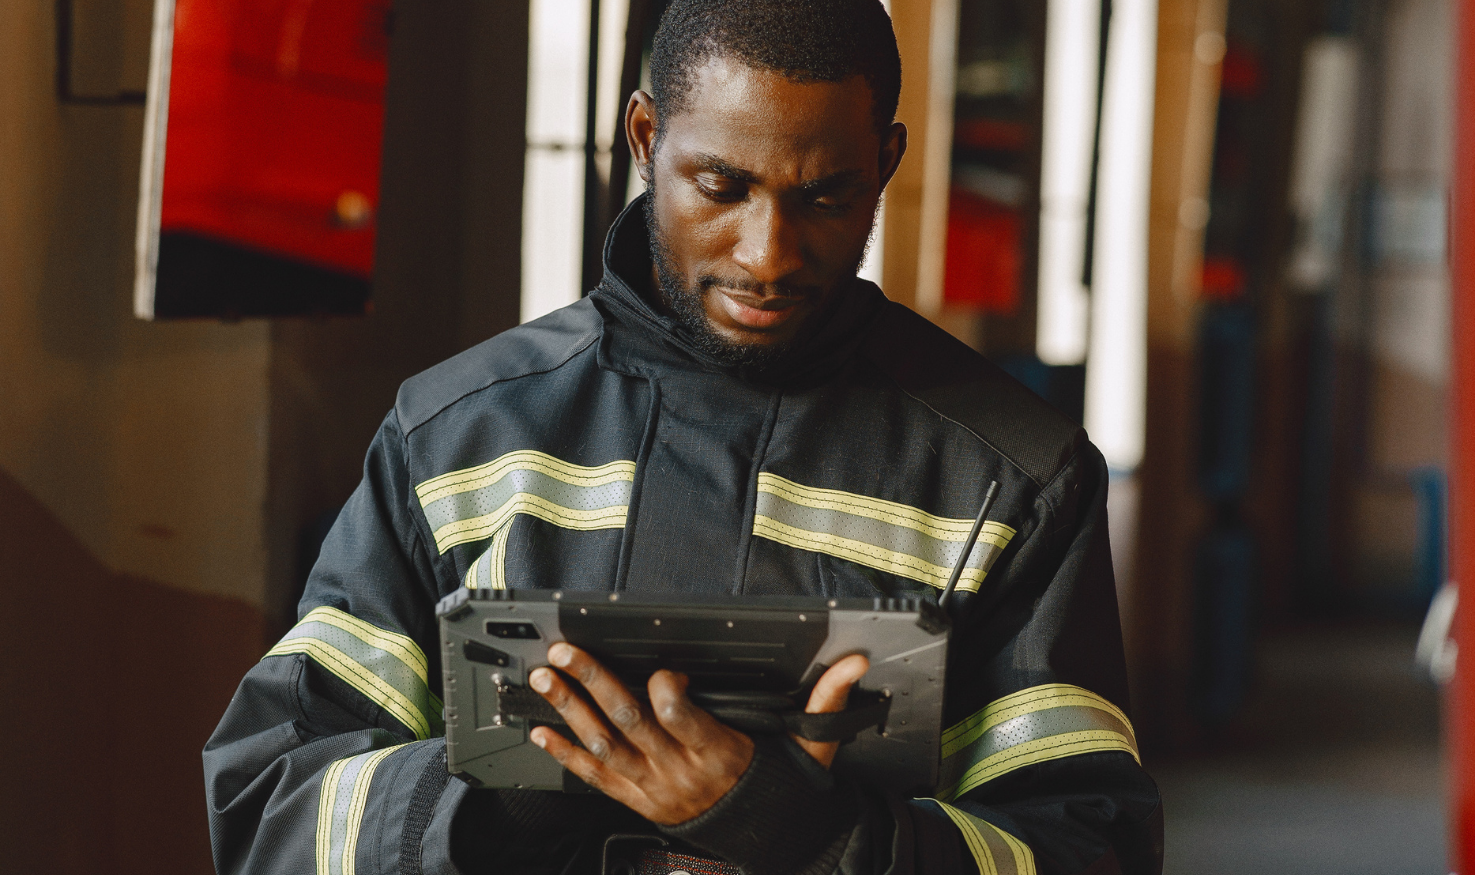 Firefighters rely on rugged devices for real-time updates